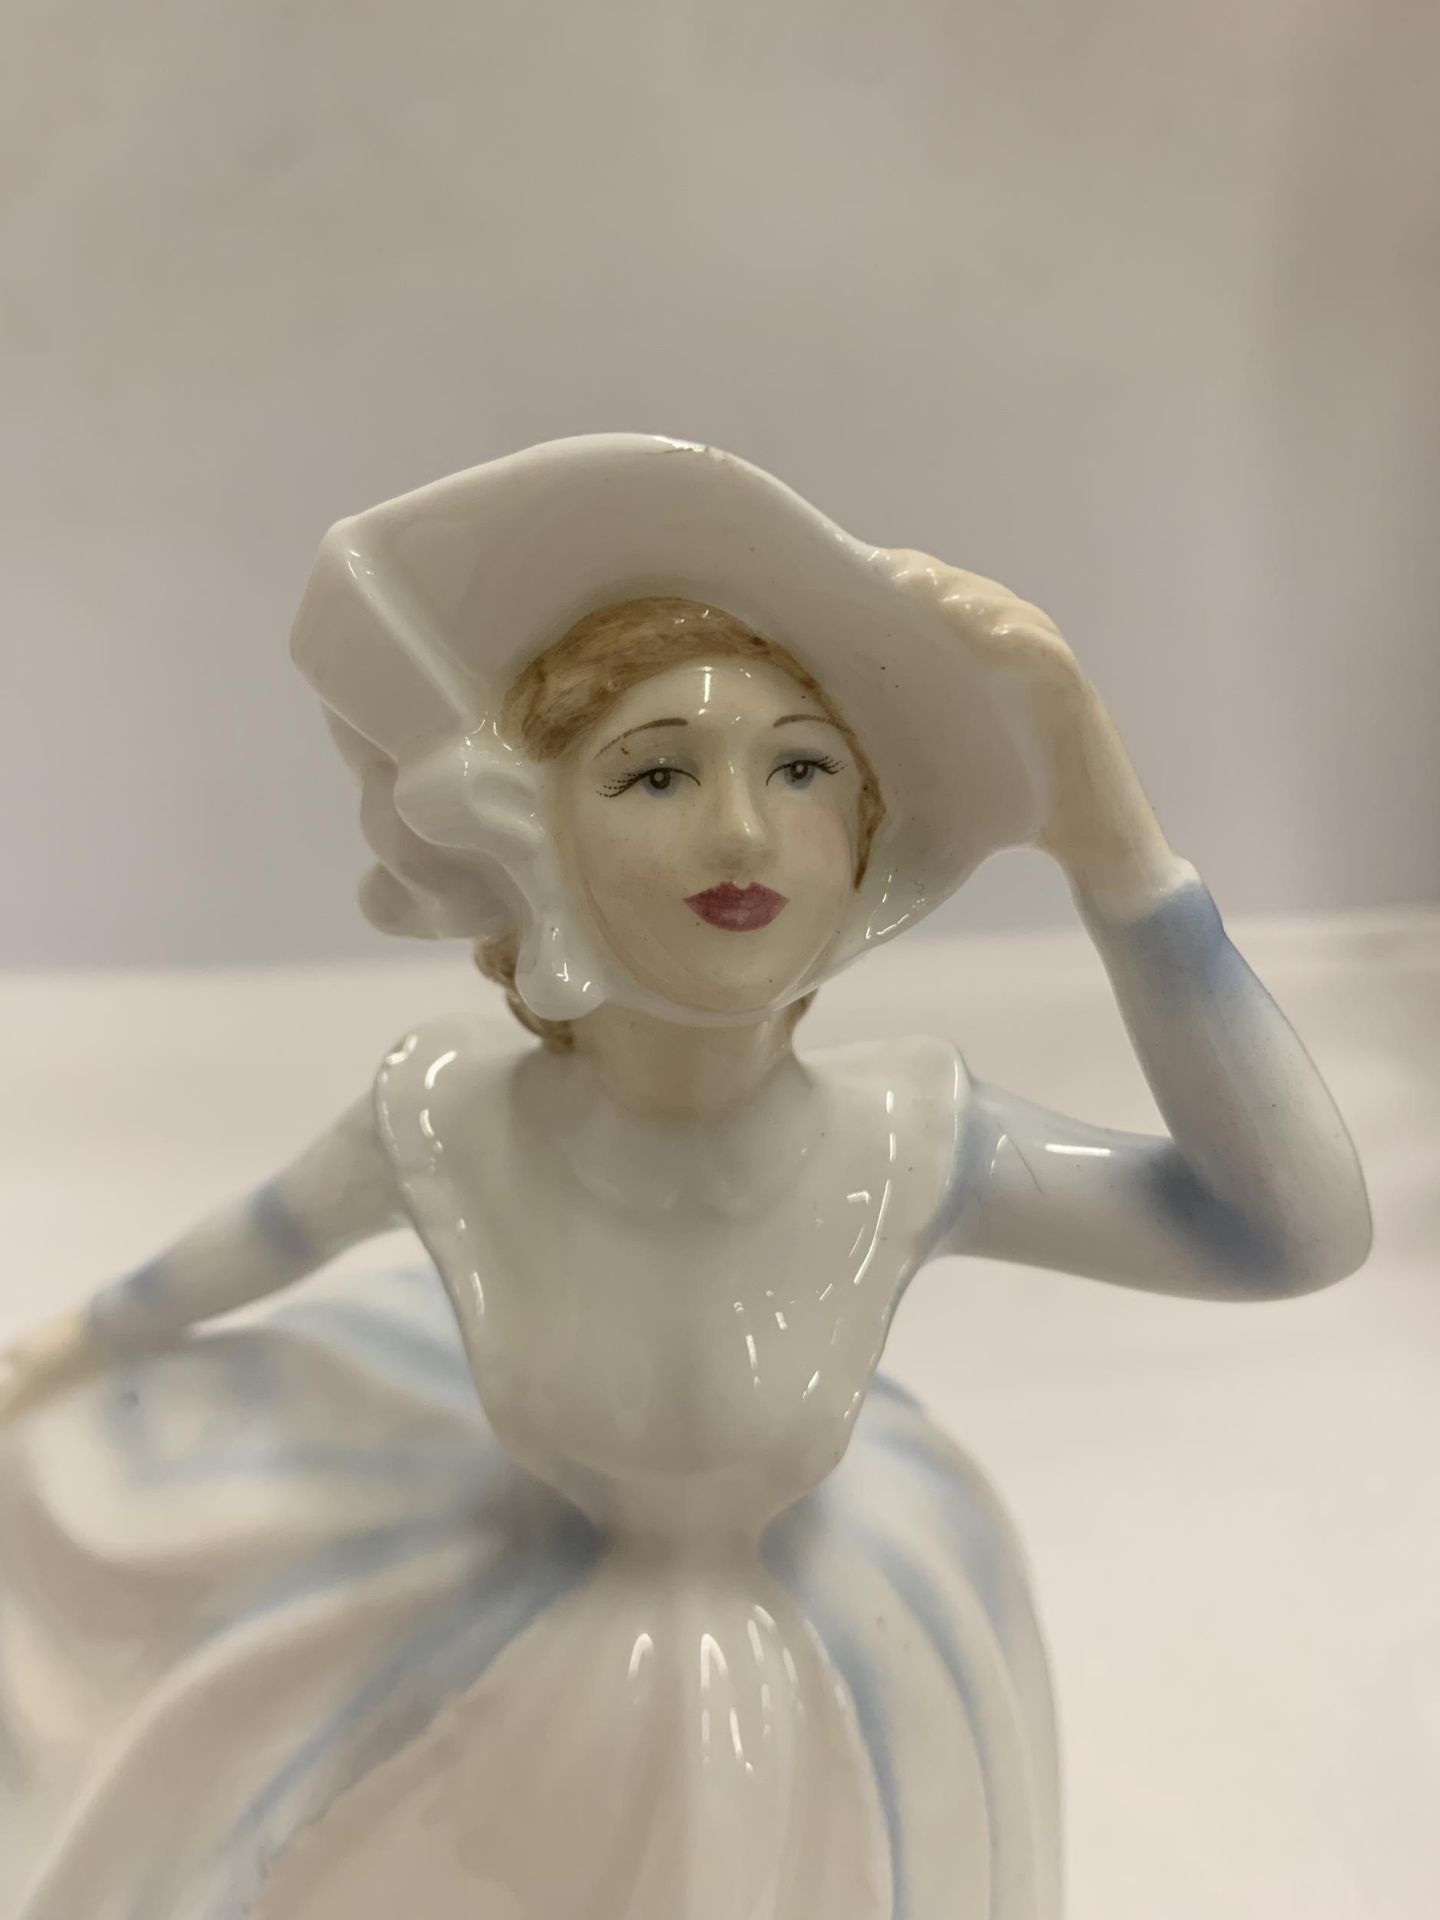 A ROYAL DOULTON LADY FIGURE IN BLUE DRESS - Image 2 of 6